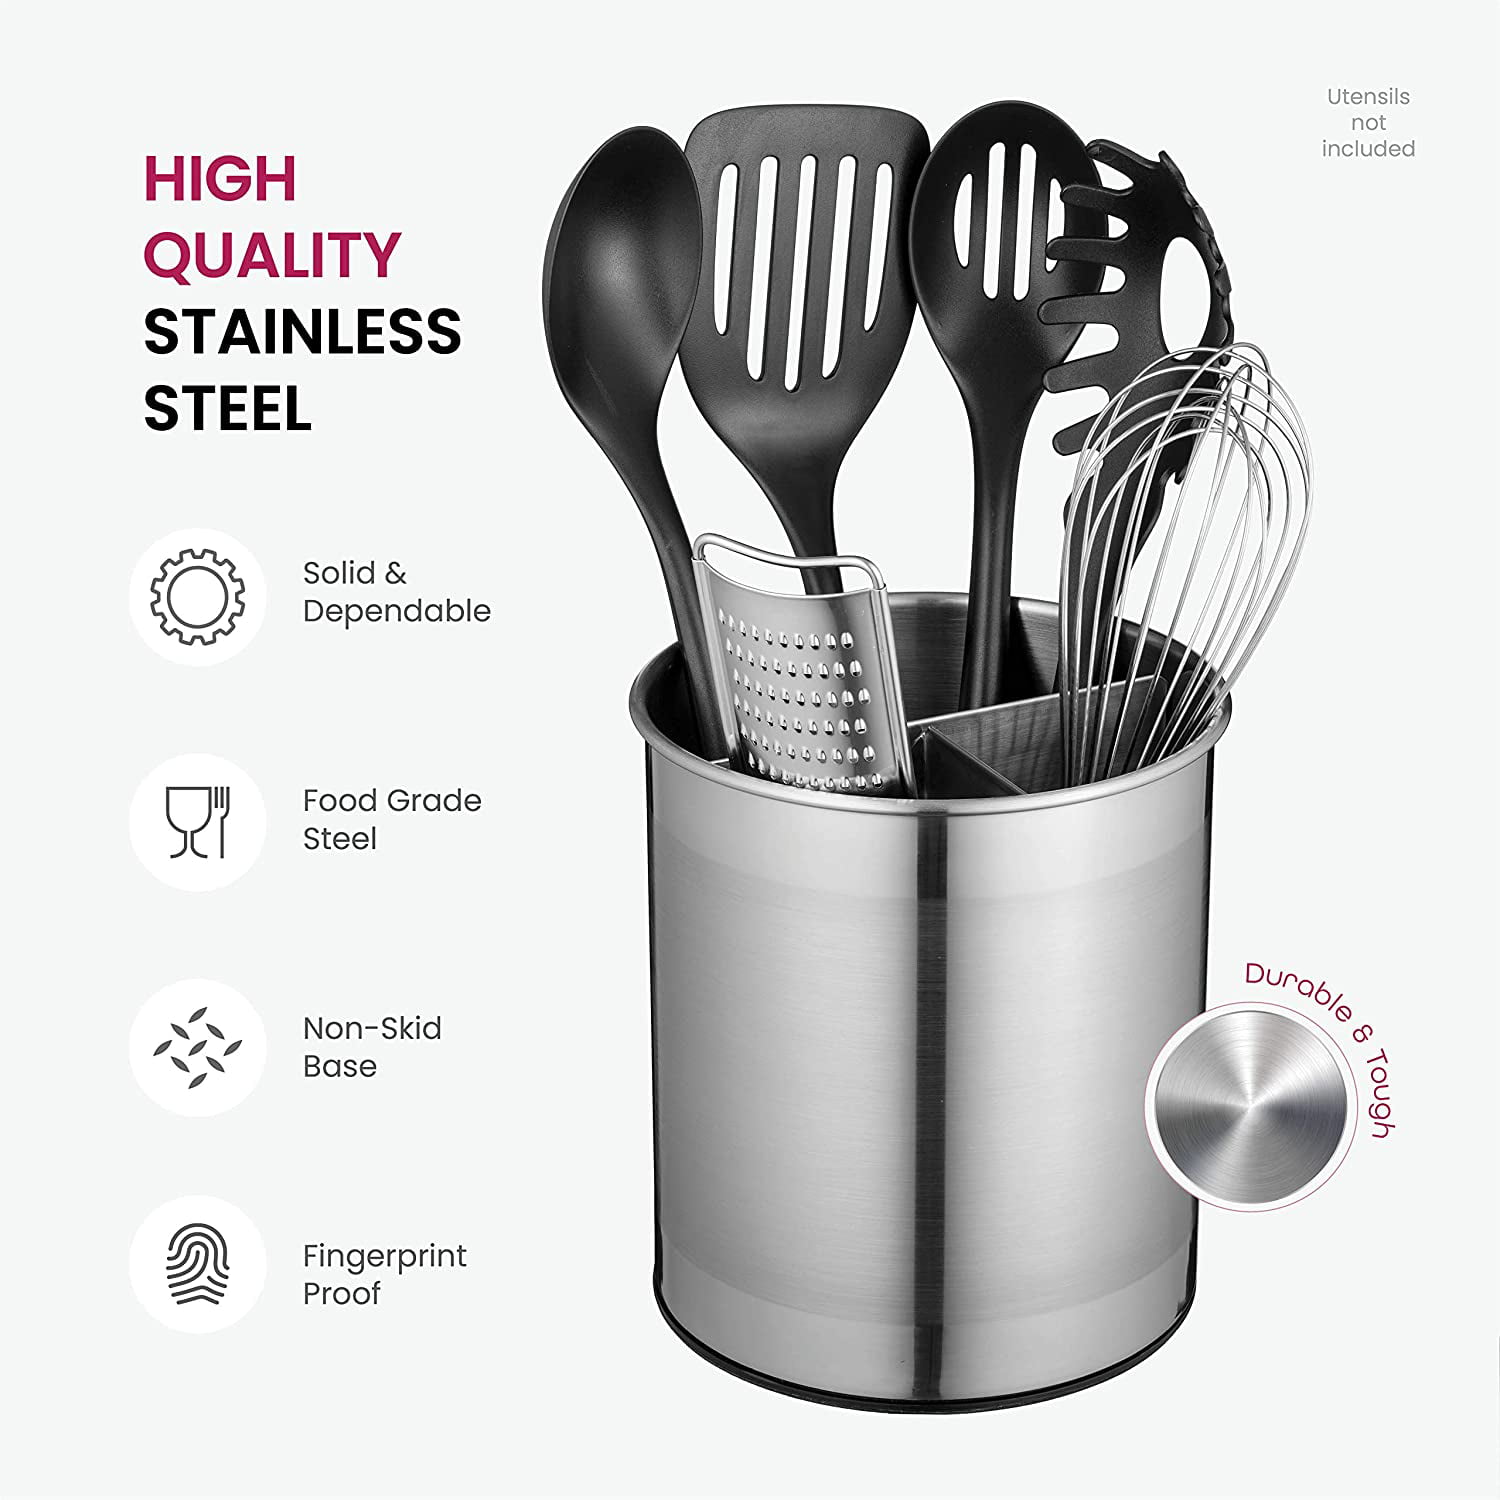 Extra Large Rotating Red Utensil Holder with Sturdy No-Tip